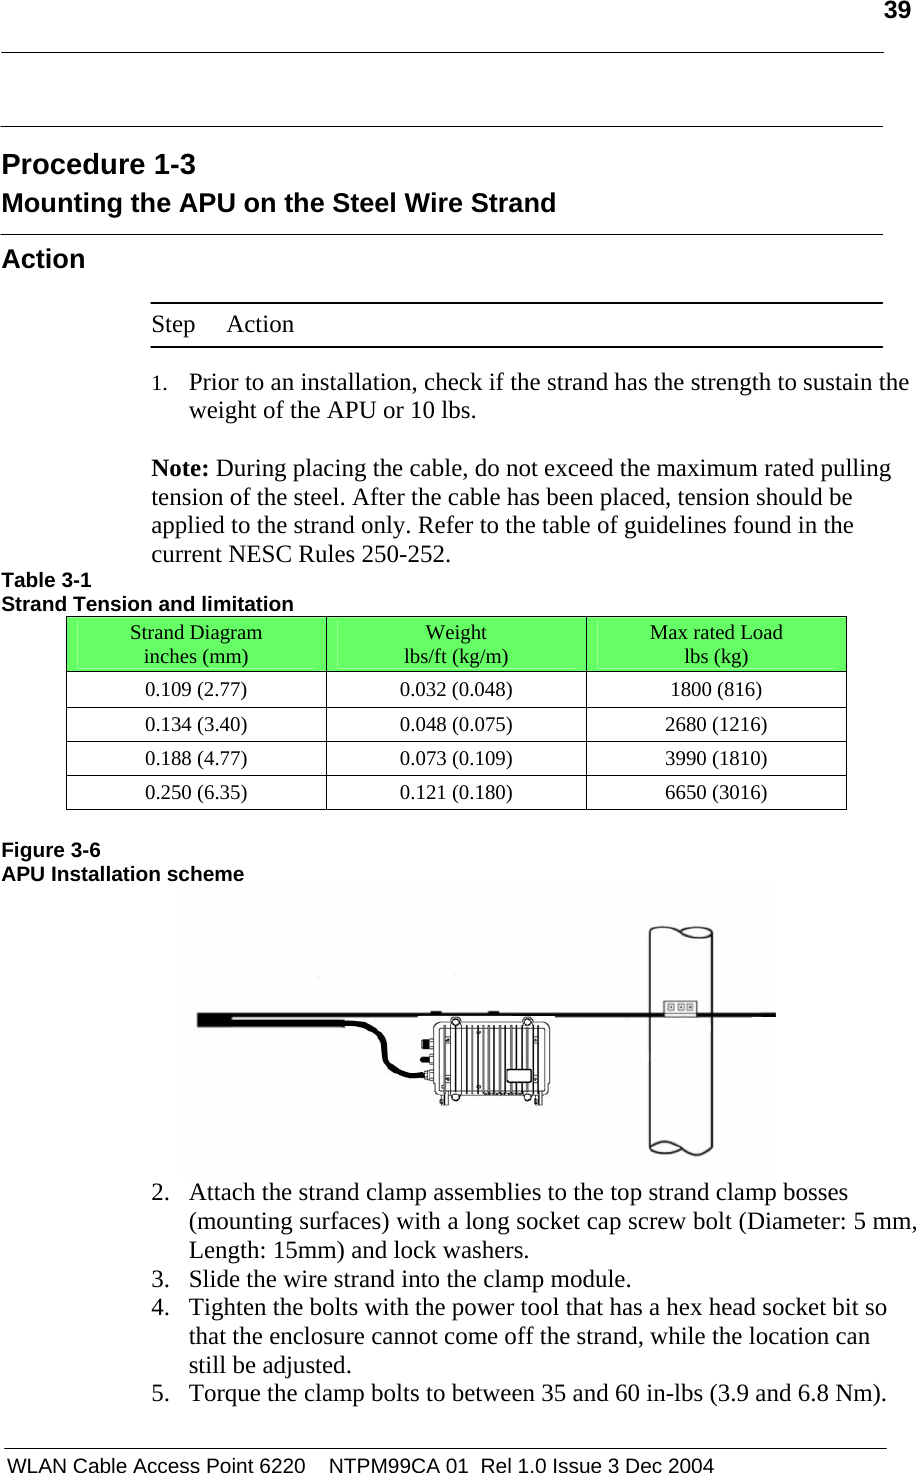   39   WLAN Cable Access Point 6220    NTPM99CA 01  Rel 1.0 Issue 3 Dec 2004  Procedure 1-3 Mounting the APU on the Steel Wire Strand Action  Step Action  1. Prior to an installation, check if the strand has the strength to sustain the weight of the APU or 10 lbs.  Note: During placing the cable, do not exceed the maximum rated pulling tension of the steel. After the cable has been placed, tension should be applied to the strand only. Refer to the table of guidelines found in the current NESC Rules 250-252.  Table 3-1 Strand Tension and limitation Strand Diagram inches (mm)  Weight lbs/ft (kg/m)  Max rated Load lbs (kg) 0.109 (2.77)  0.032 (0.048)  1800 (816) 0.134 (3.40)  0.048 (0.075)  2680 (1216) 0.188 (4.77)  0.073 (0.109)  3990 (1810) 0.250 (6.35)  0.121 (0.180)  6650 (3016)  Figure 3-6 APU Installation scheme  2. Attach the strand clamp assemblies to the top strand clamp bosses (mounting surfaces) with a long socket cap screw bolt (Diameter: 5 mm, Length: 15mm) and lock washers. 3. Slide the wire strand into the clamp module. 4. Tighten the bolts with the power tool that has a hex head socket bit so that the enclosure cannot come off the strand, while the location can still be adjusted. 5. Torque the clamp bolts to between 35 and 60 in-lbs (3.9 and 6.8 Nm).  